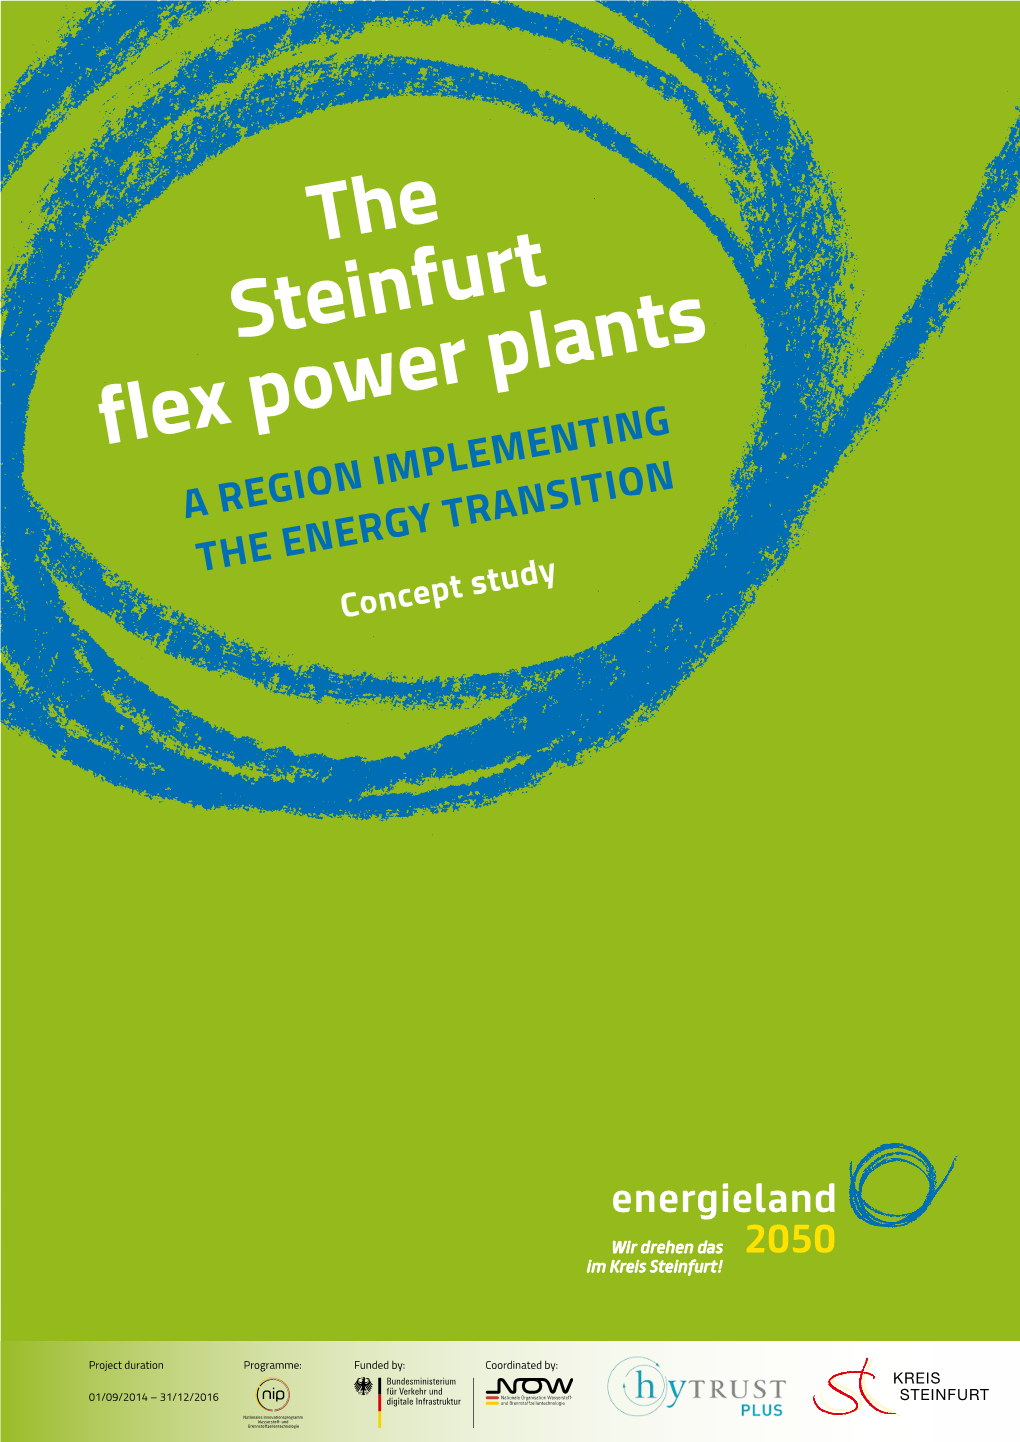 The Steinfurt Flex Power Plants a REGION IMPLEMENTING the ENERGY TRANSITION Concept Study